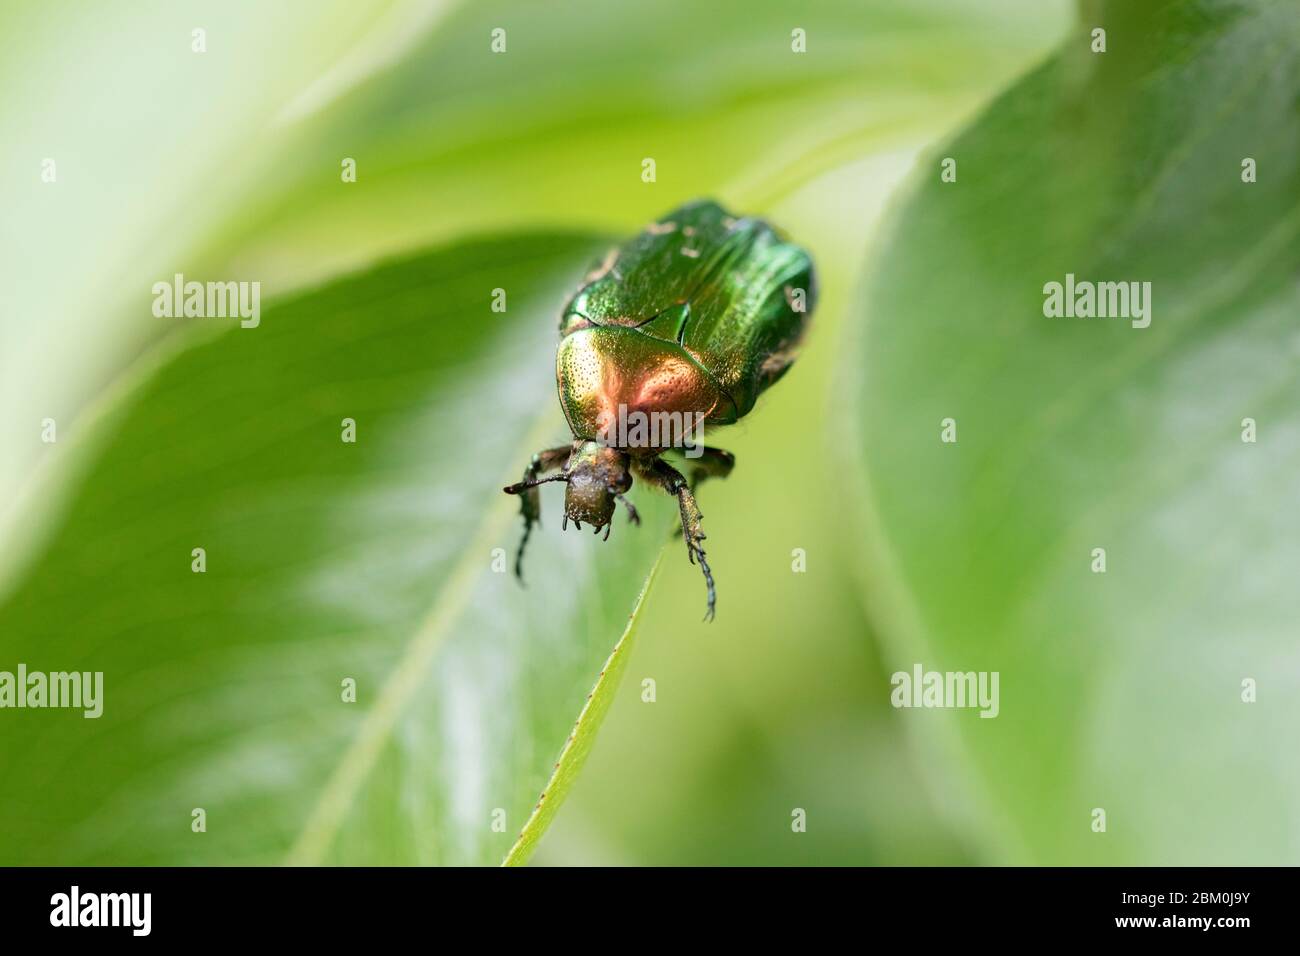 A closeup of a beetle (Cetonia Aurata) on a green leaf with a blurry background Stock Photo